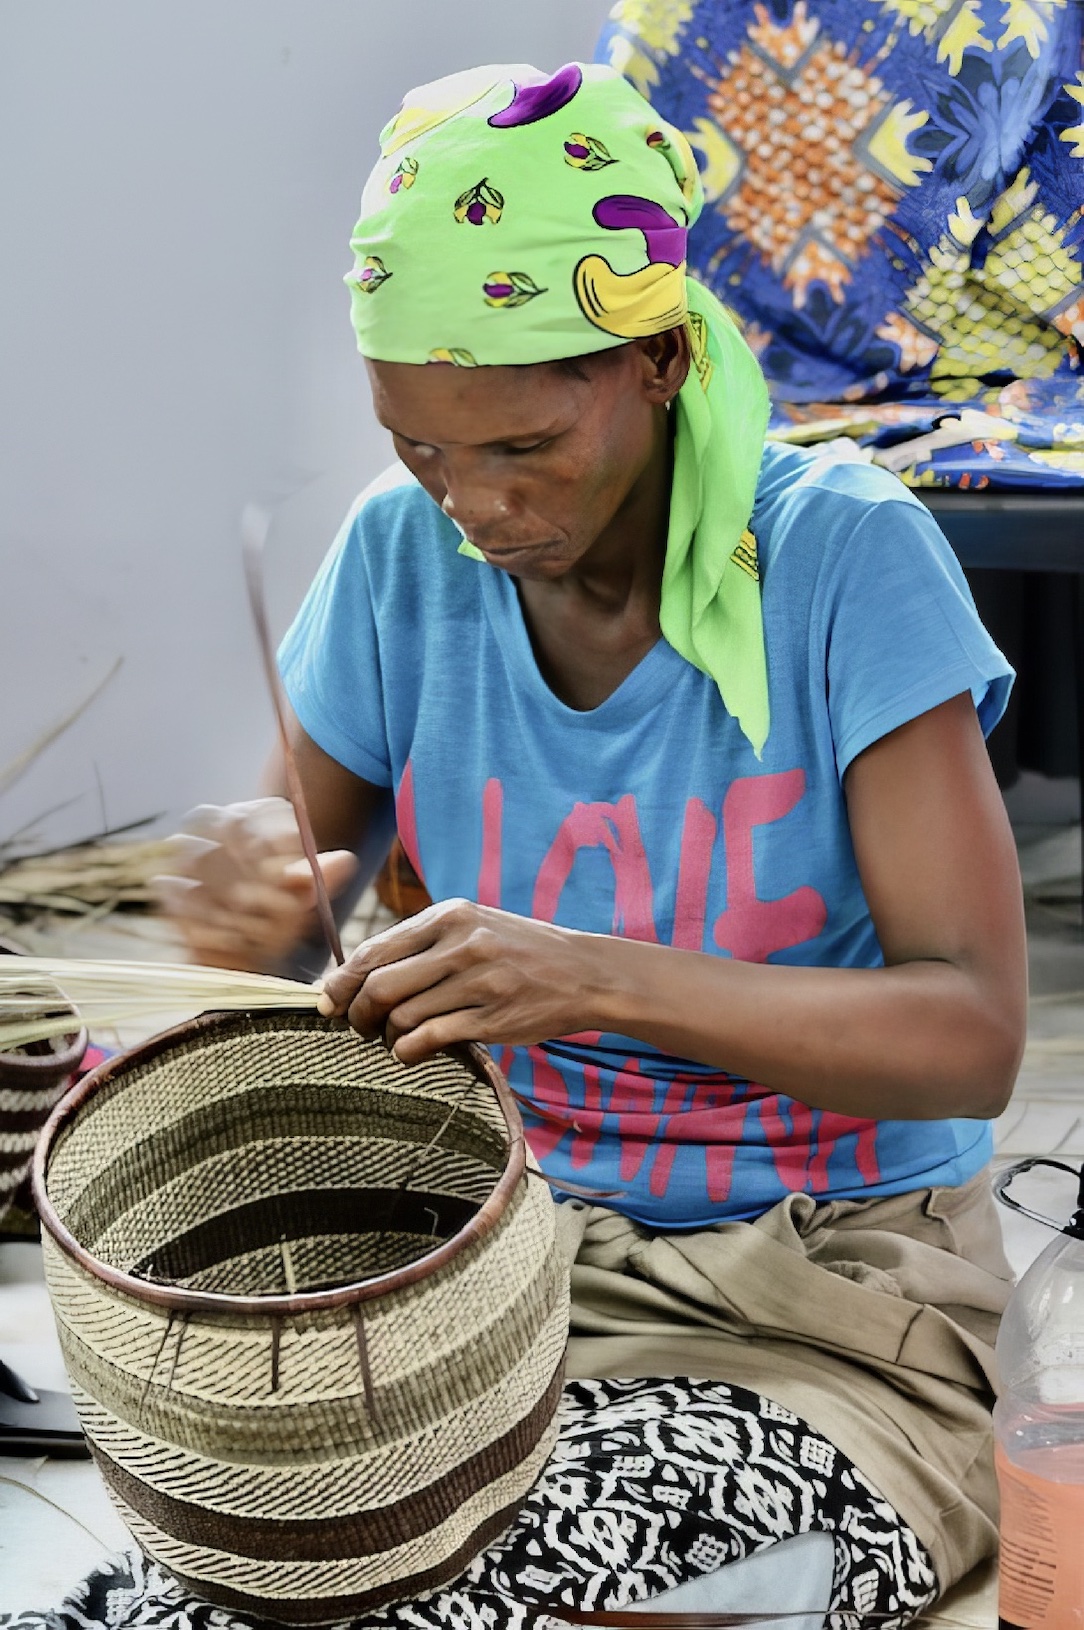 A San woman focusses intently on the basket she is weaving.